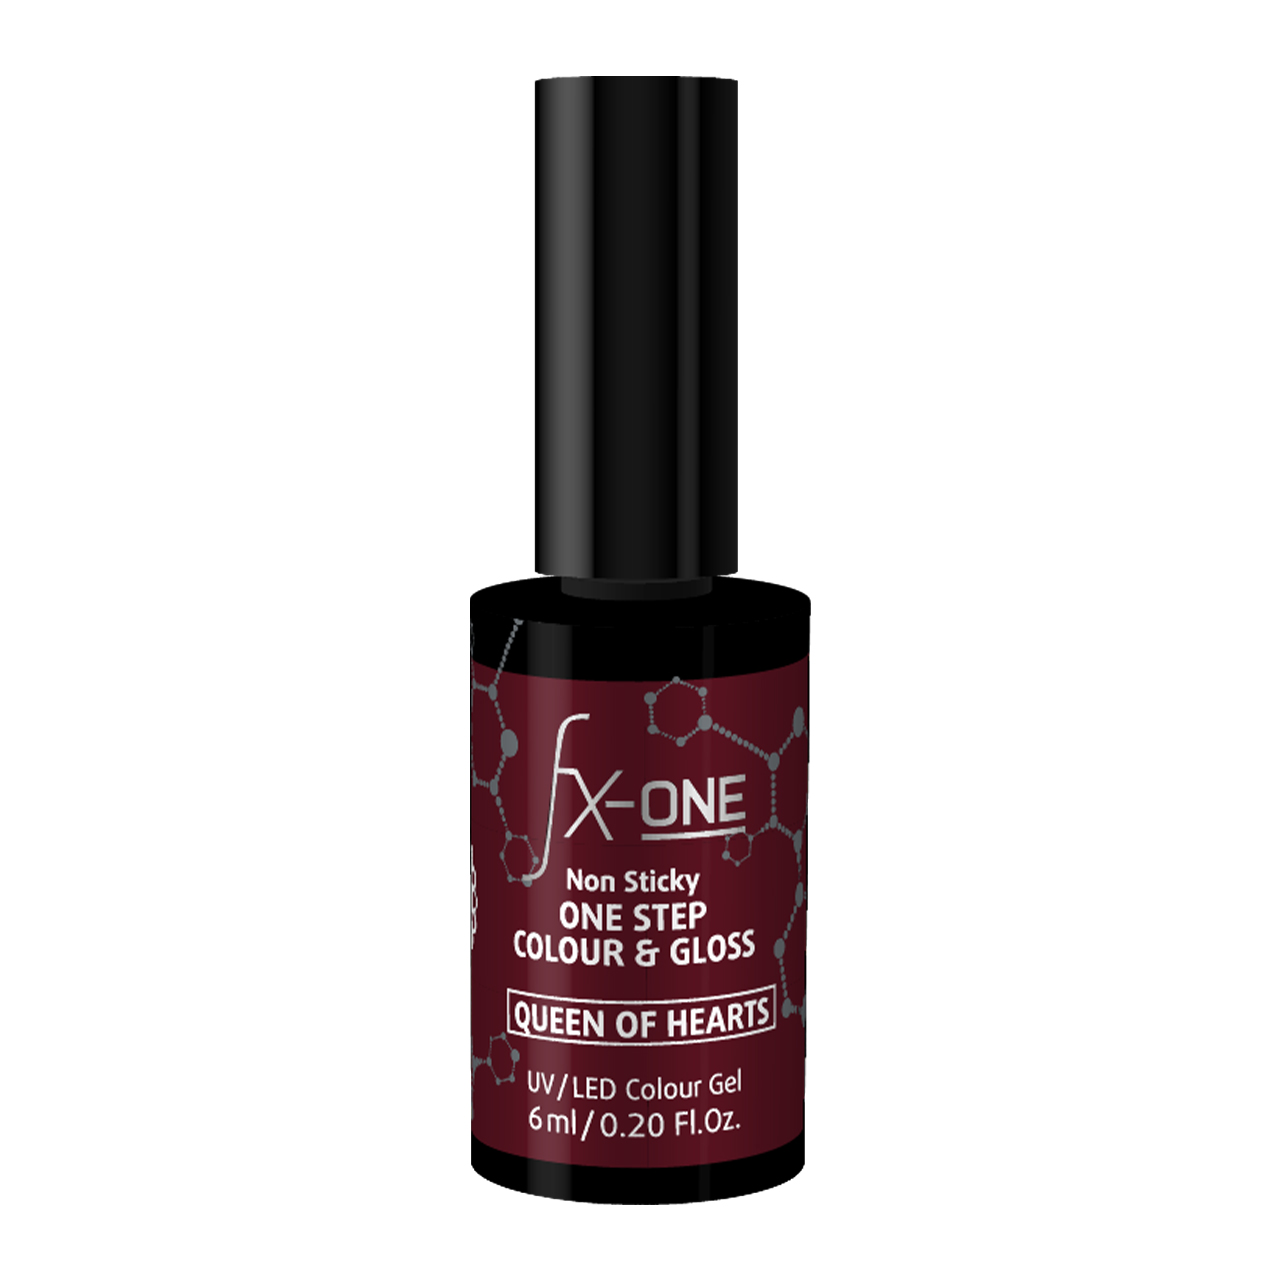 FX-ONE Colour & Gloss Queen of Hearts